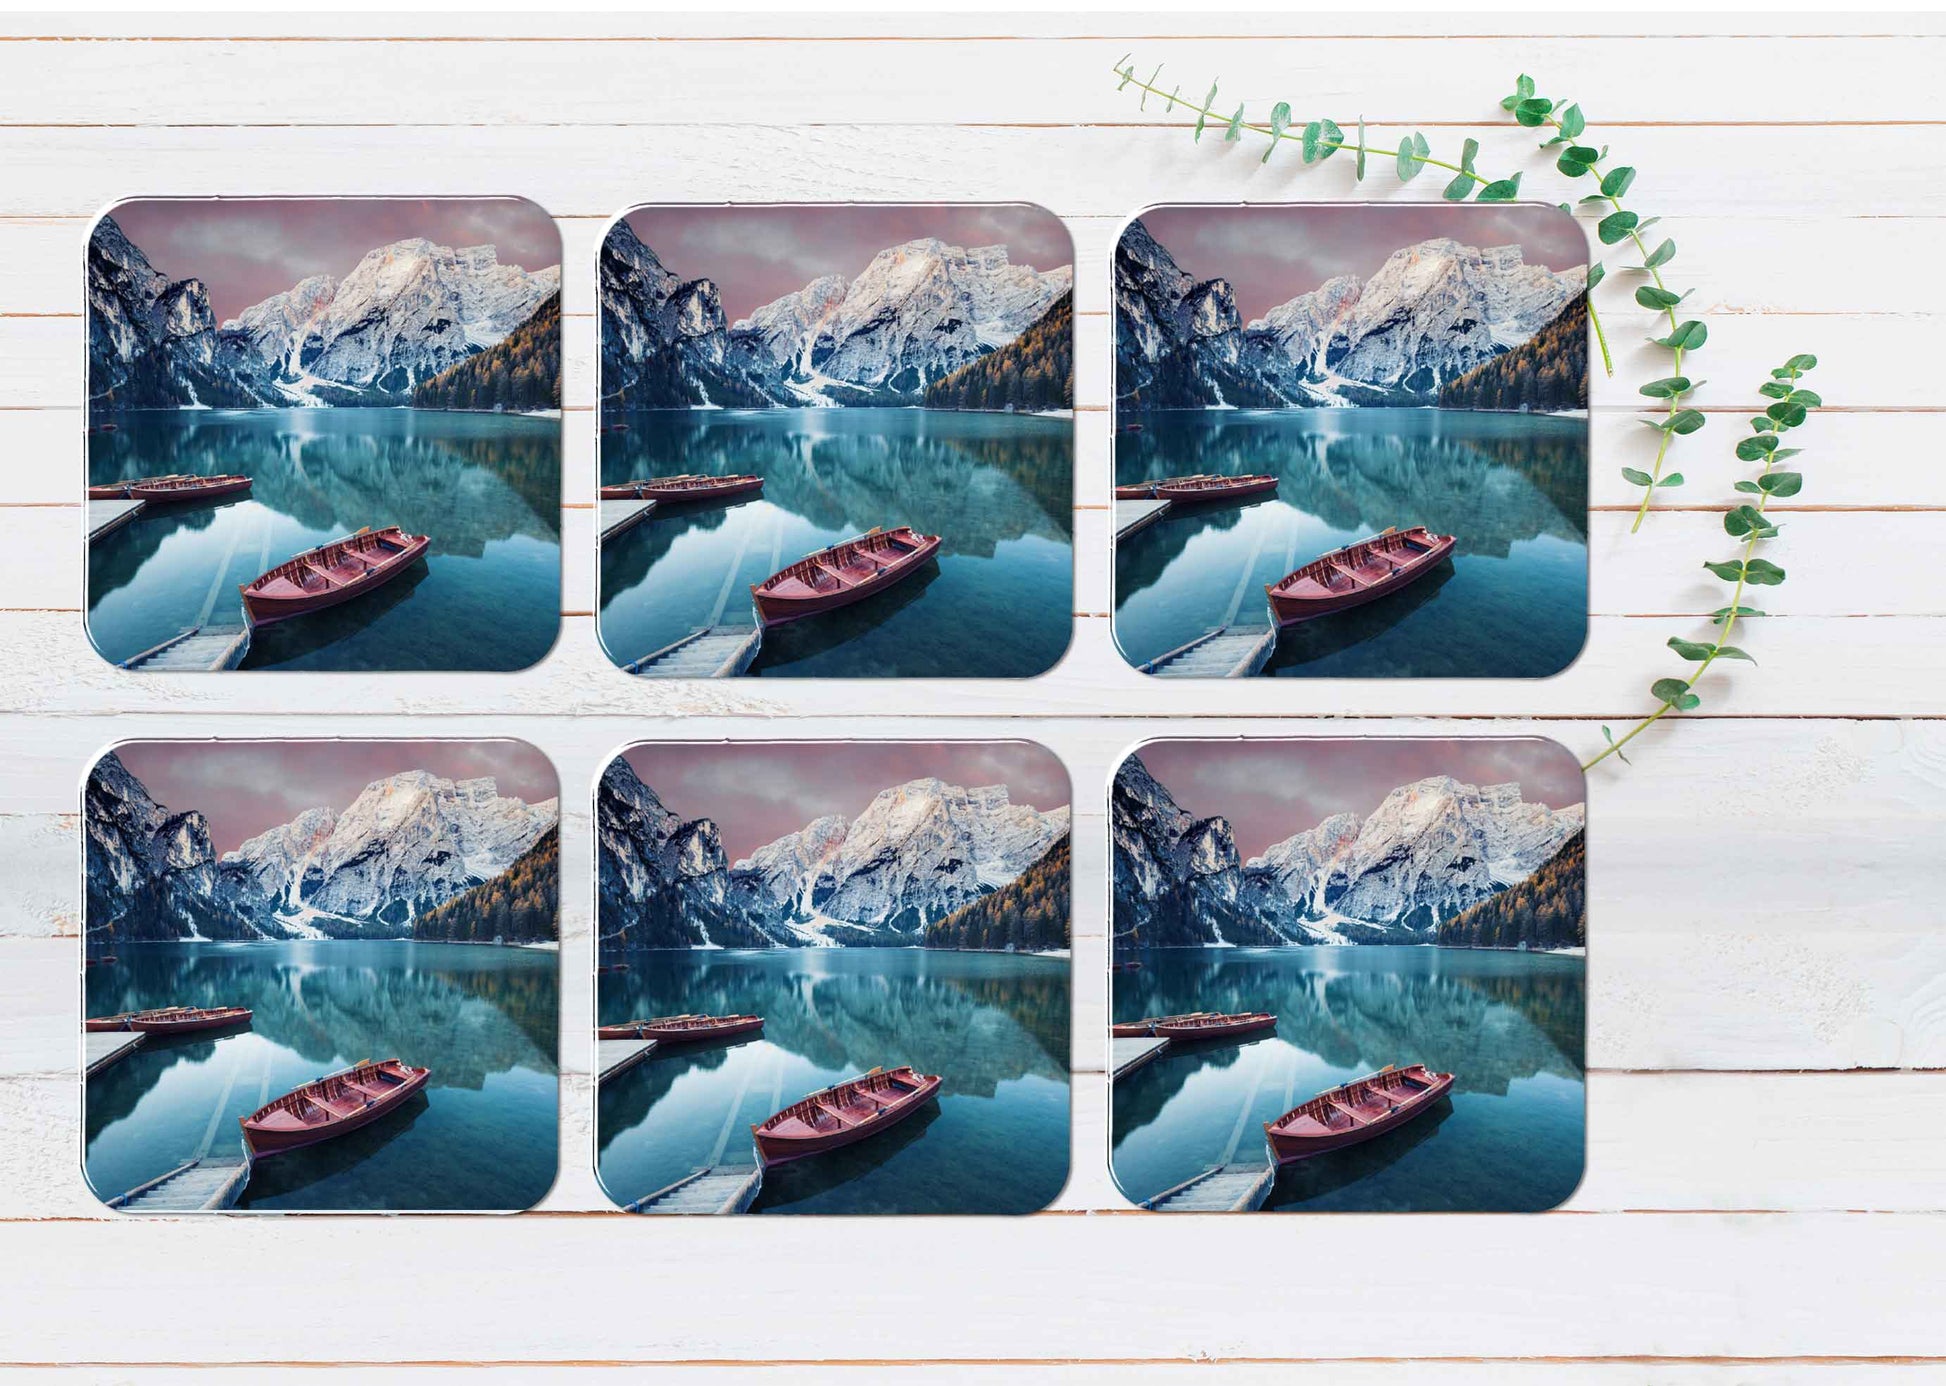 Wooden Boat at The Alpine Mountain Lake Coasters Wood & Rubber - Set of 6 Coasters